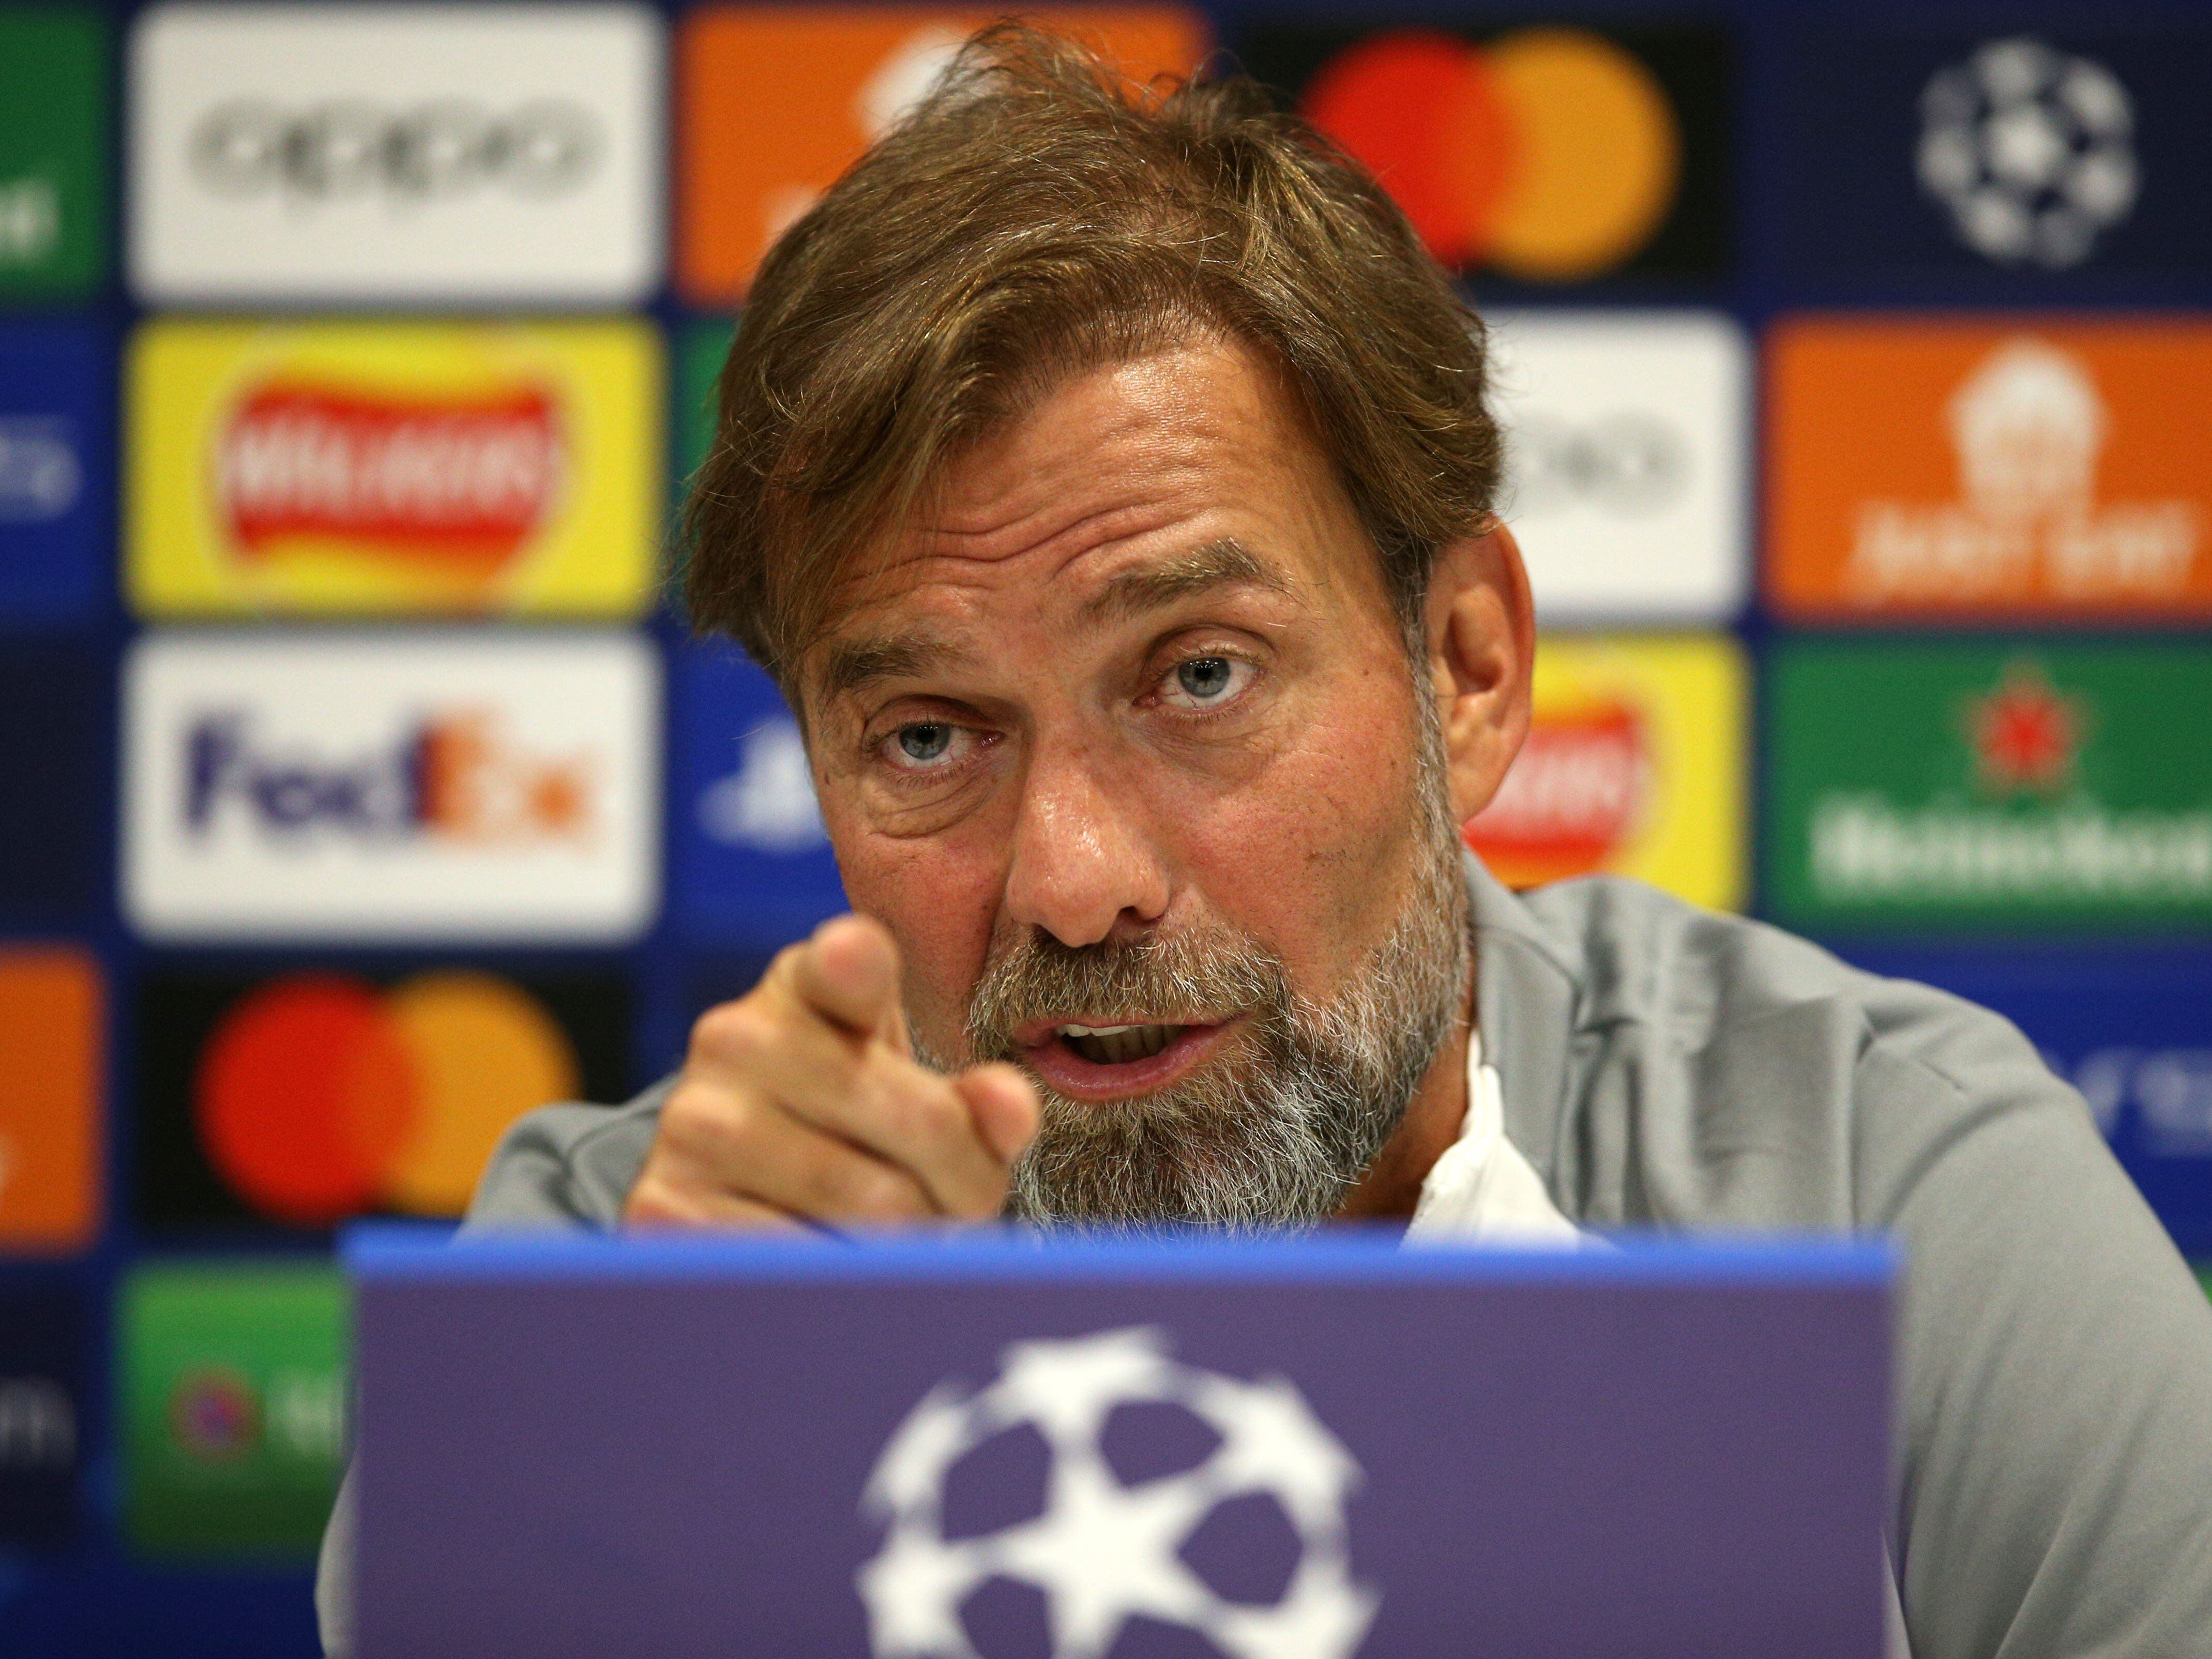 Napoli ‘horror show’ led to ‘absolute truths’ being told, says Jurgen Klopp